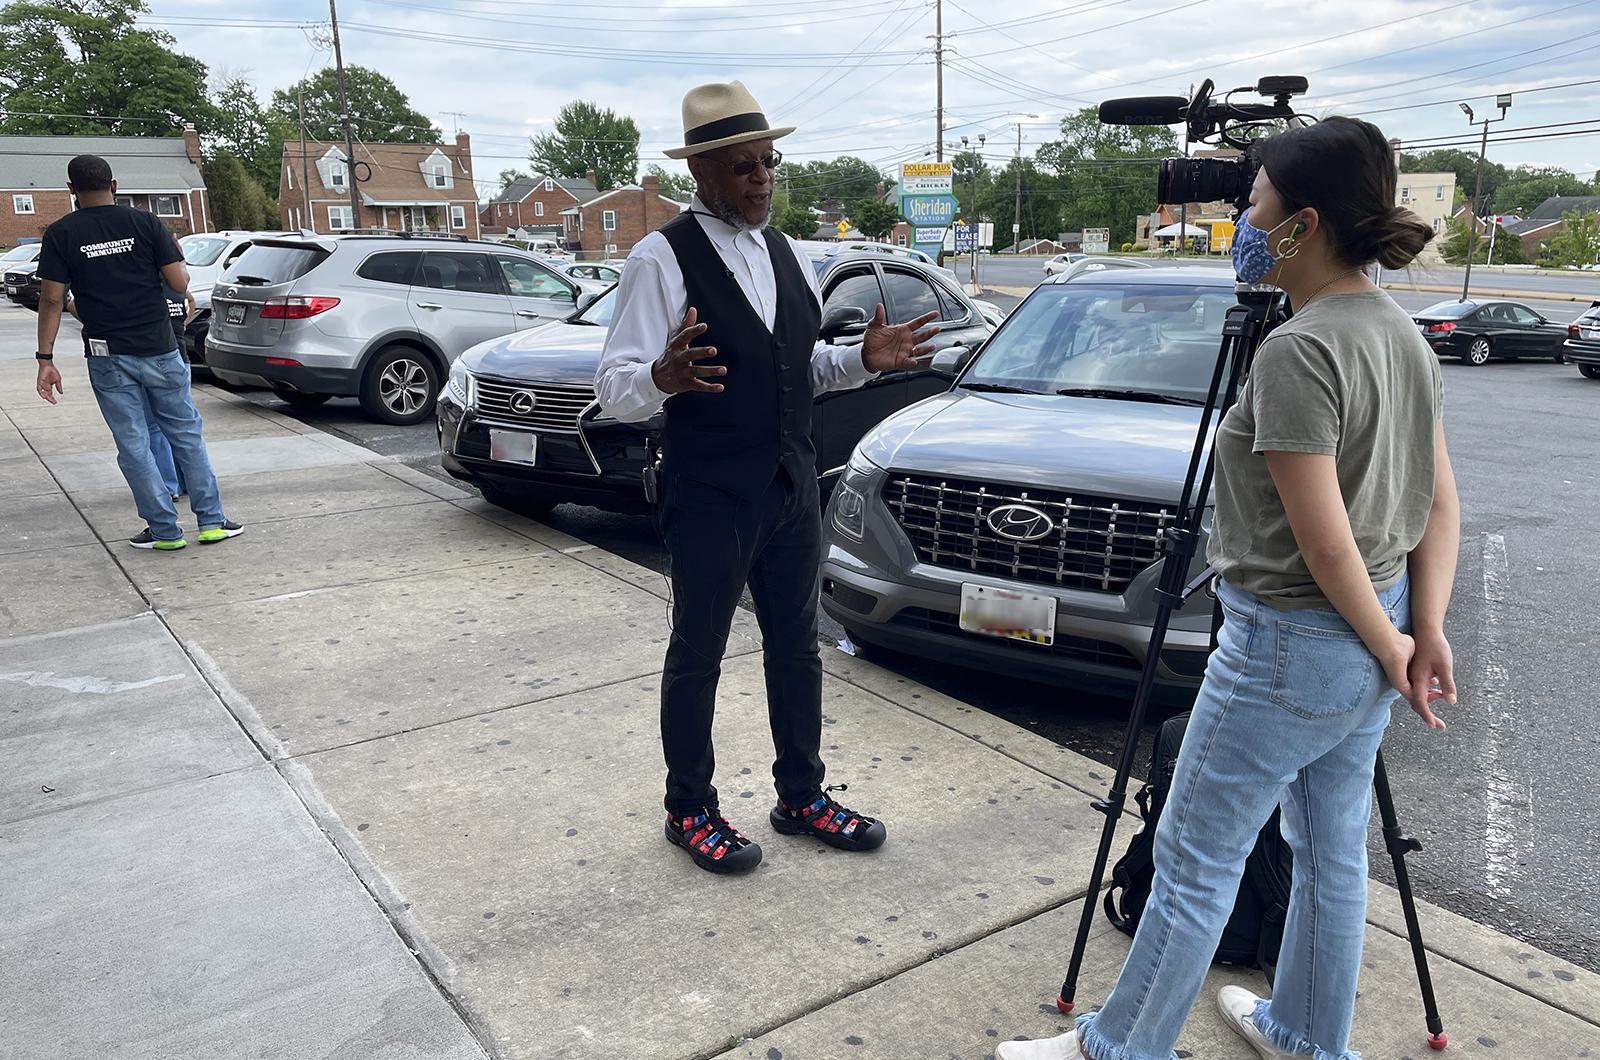 Stephen Thomas talks to a Washington Post reporter with a video camera on the sidewalk outside a barbershop.